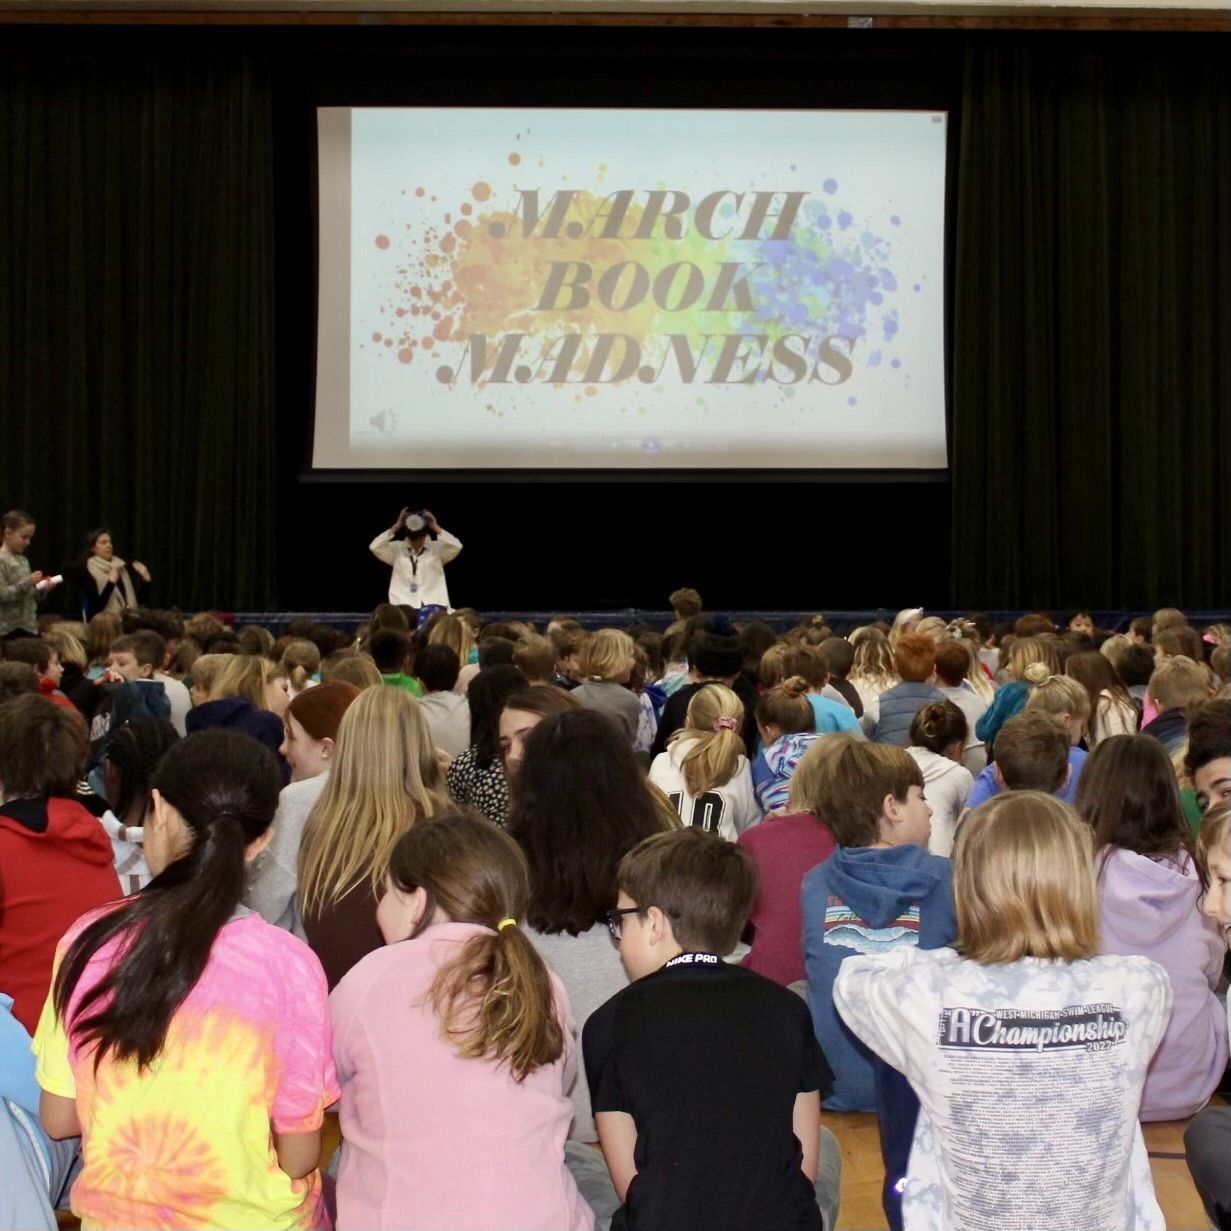 photo of kids in gym by March Book Madness sign